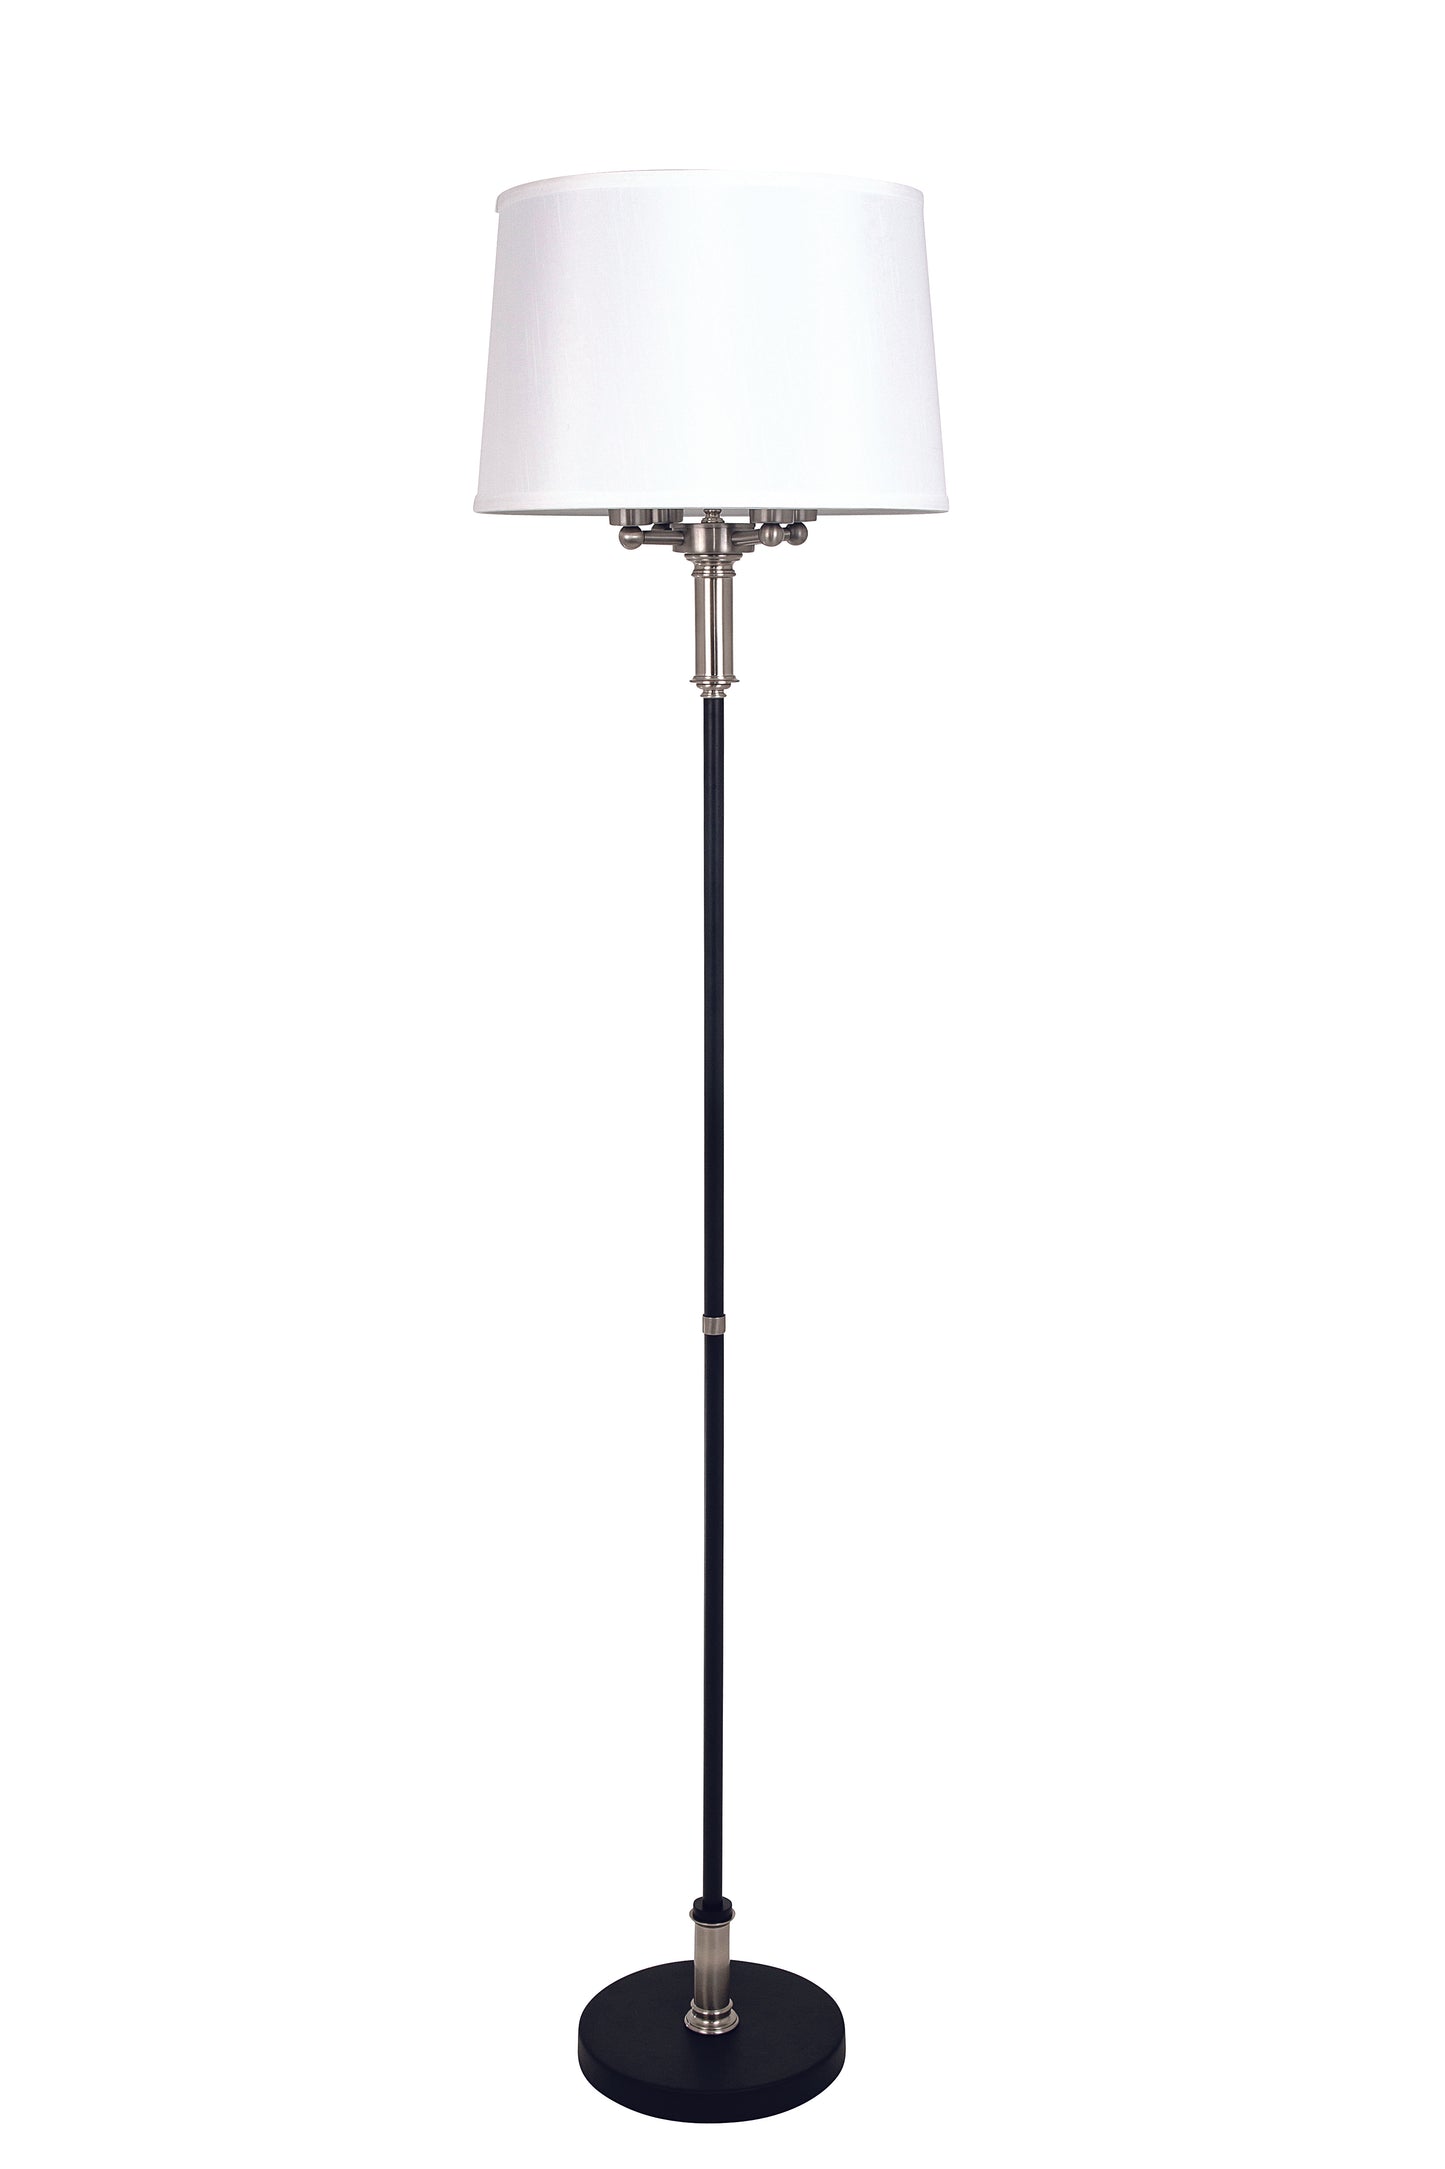 House of Troy Alpine 4 light cluster black/satin nickel floor lamp with white silk softback shade A702-BLK/SN